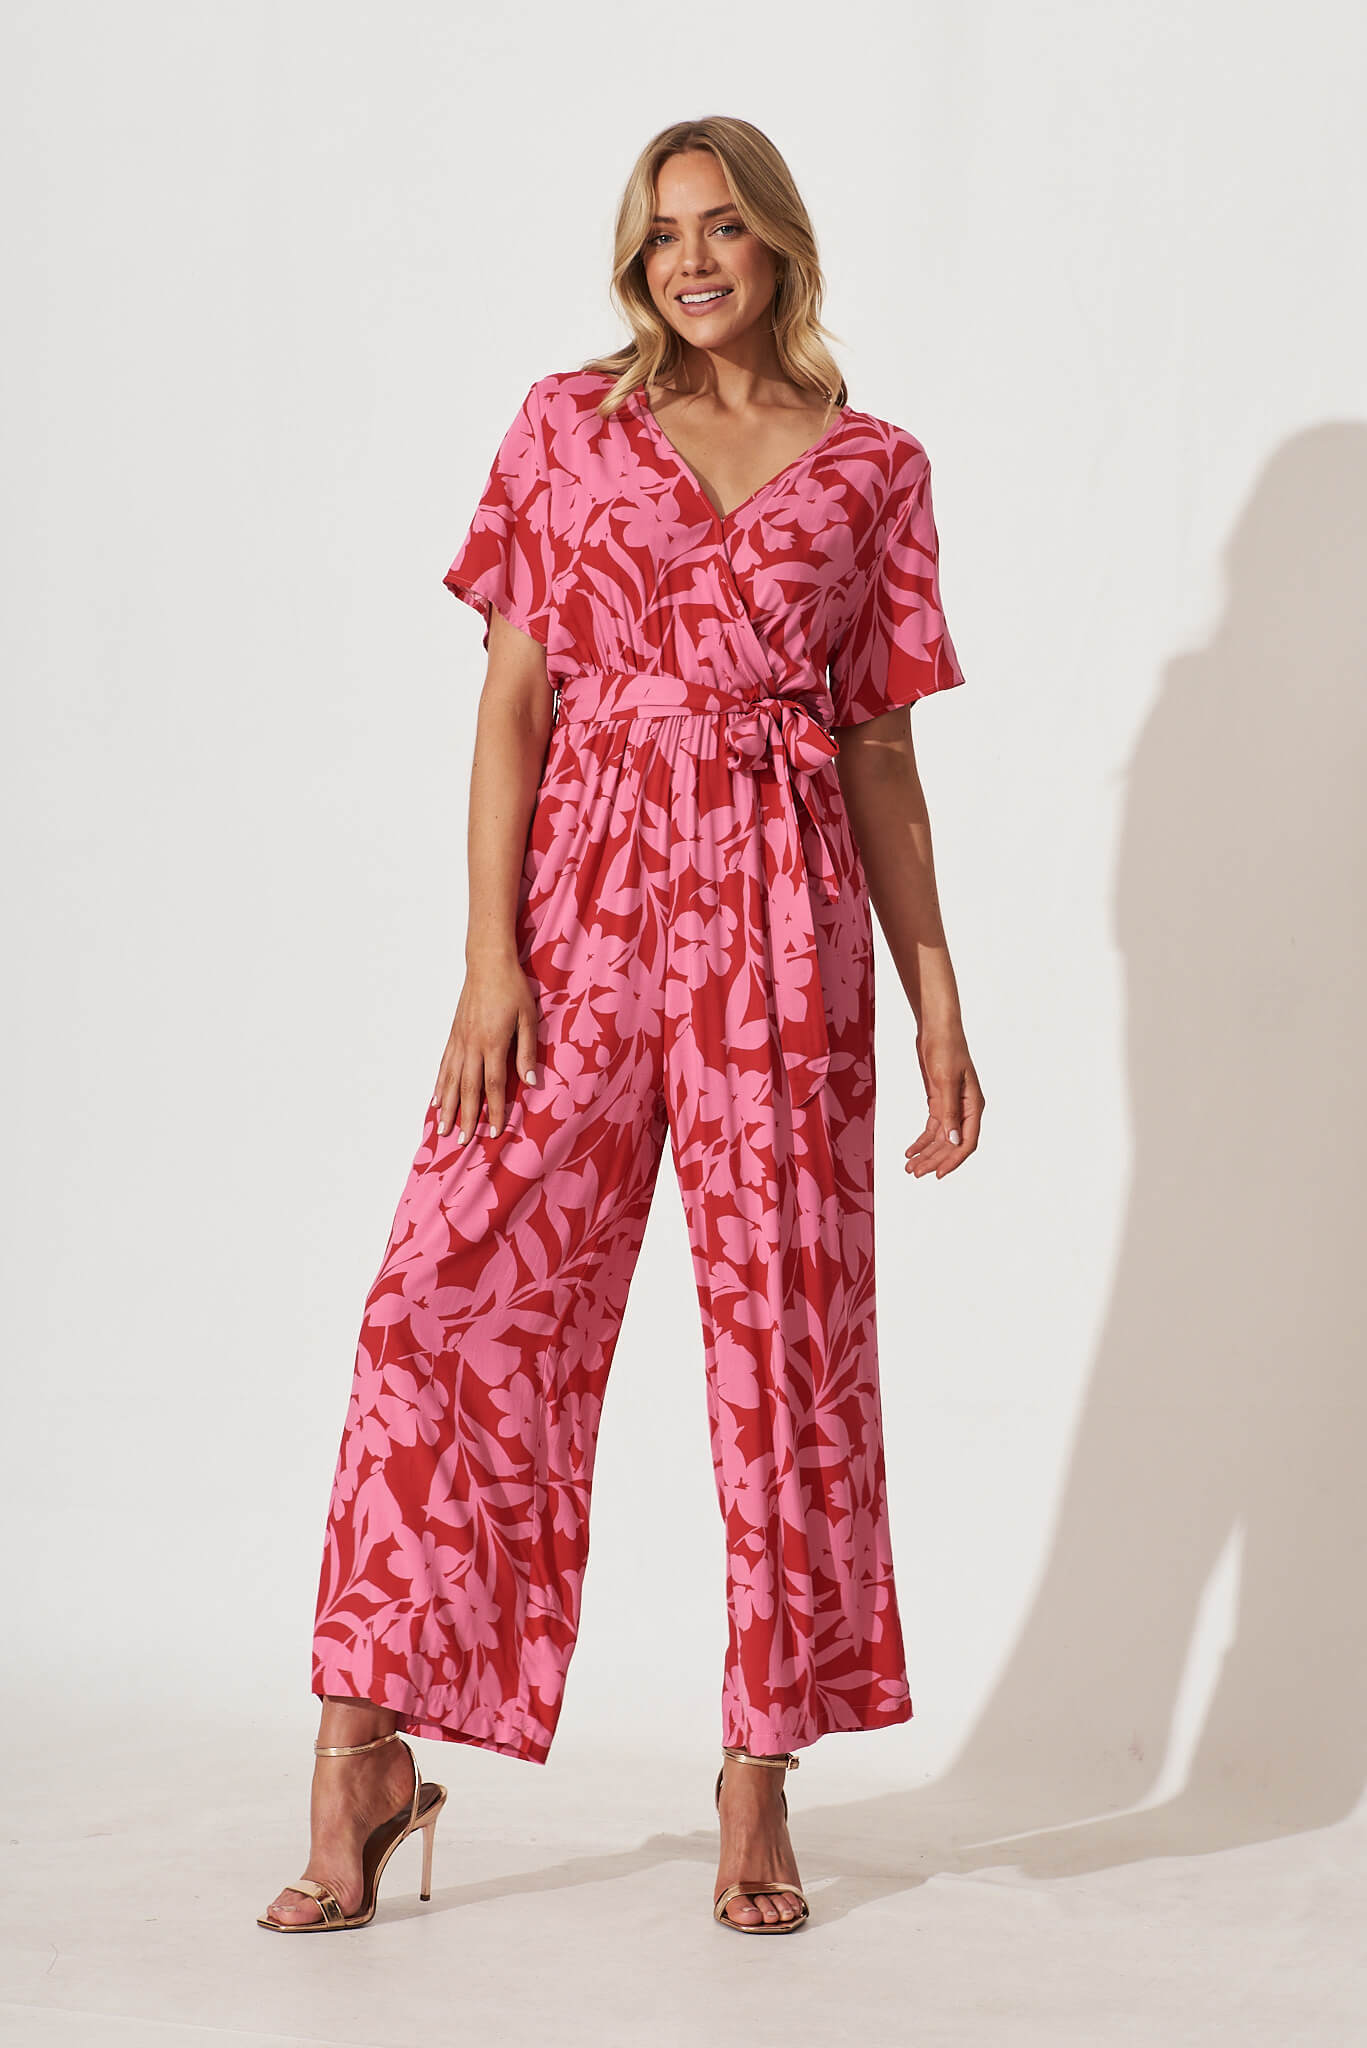 Calliope Jumpsuit In Red With Pink Floral Print - full length